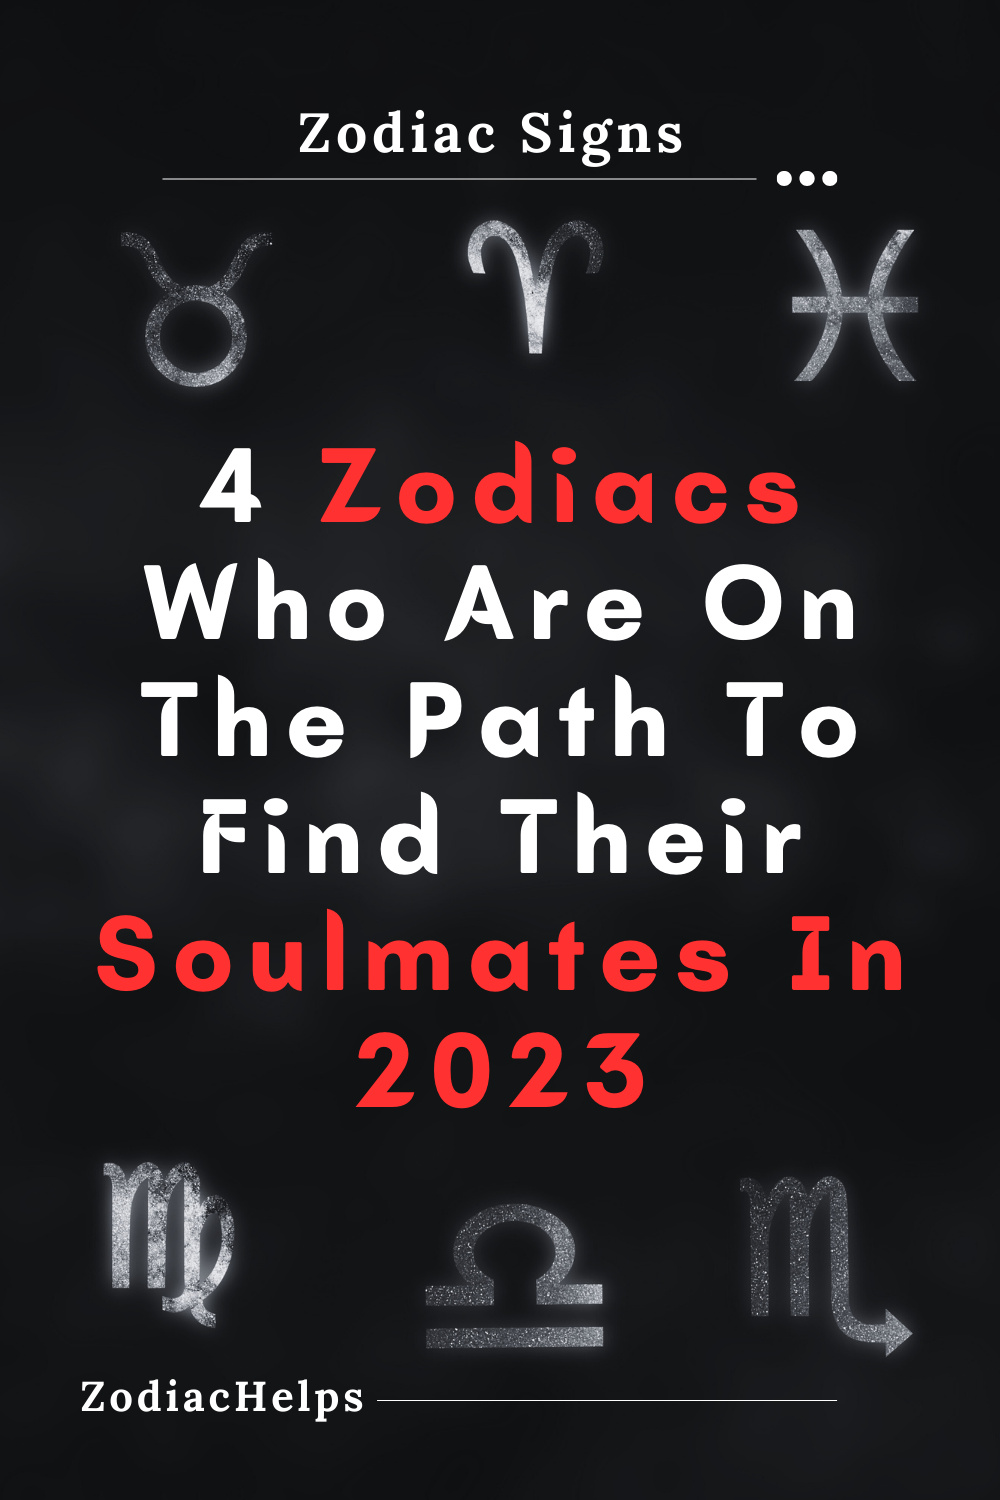 4 Zodiacs Who Are On The Path To Find Their Soulmates In 2023